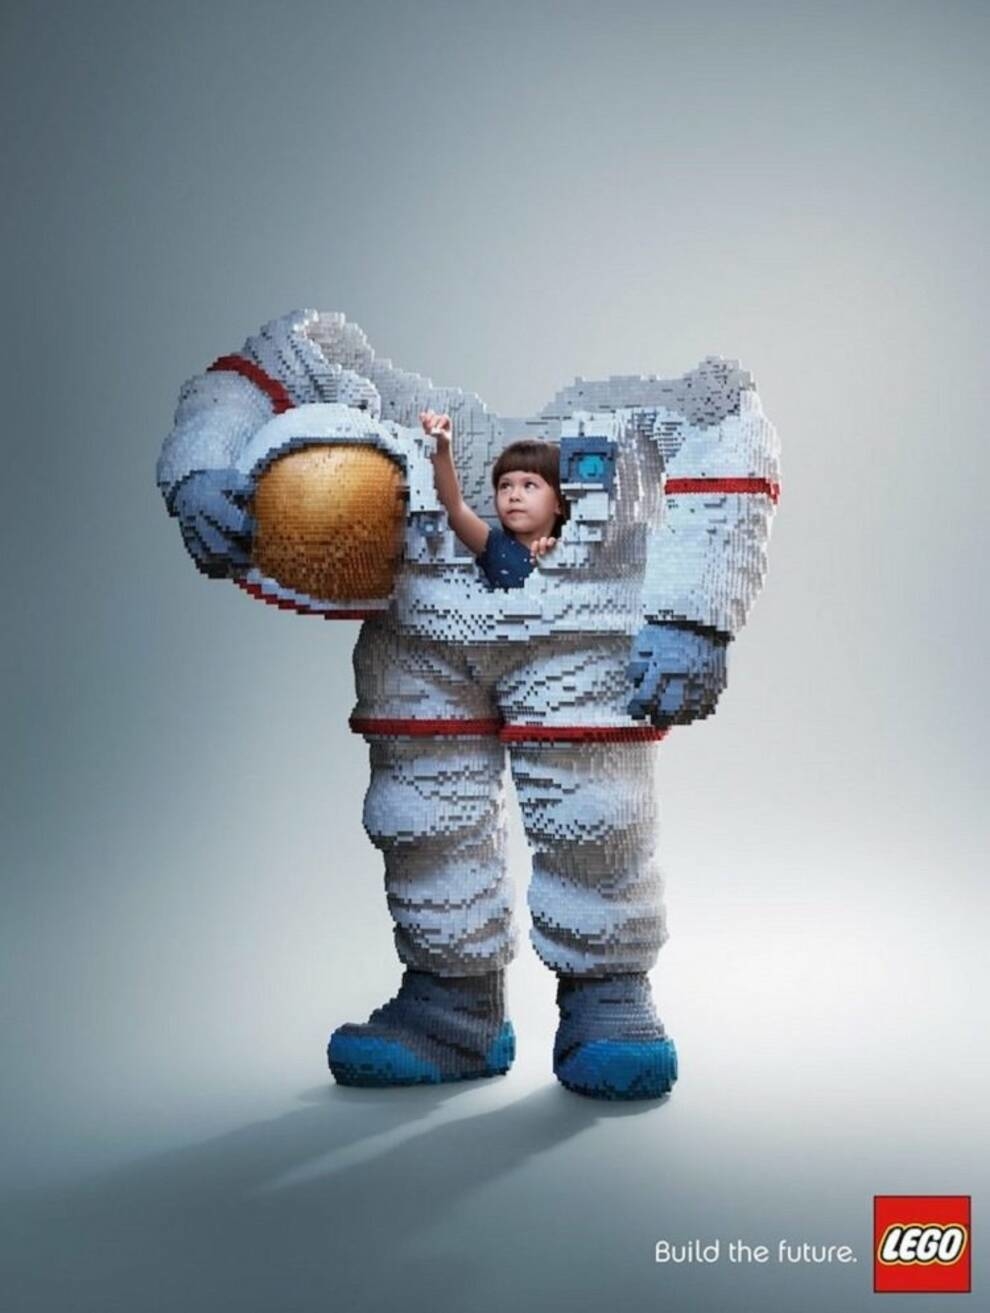 Astronauts, firefighters and rock stars - large-scale construction sets from Lego